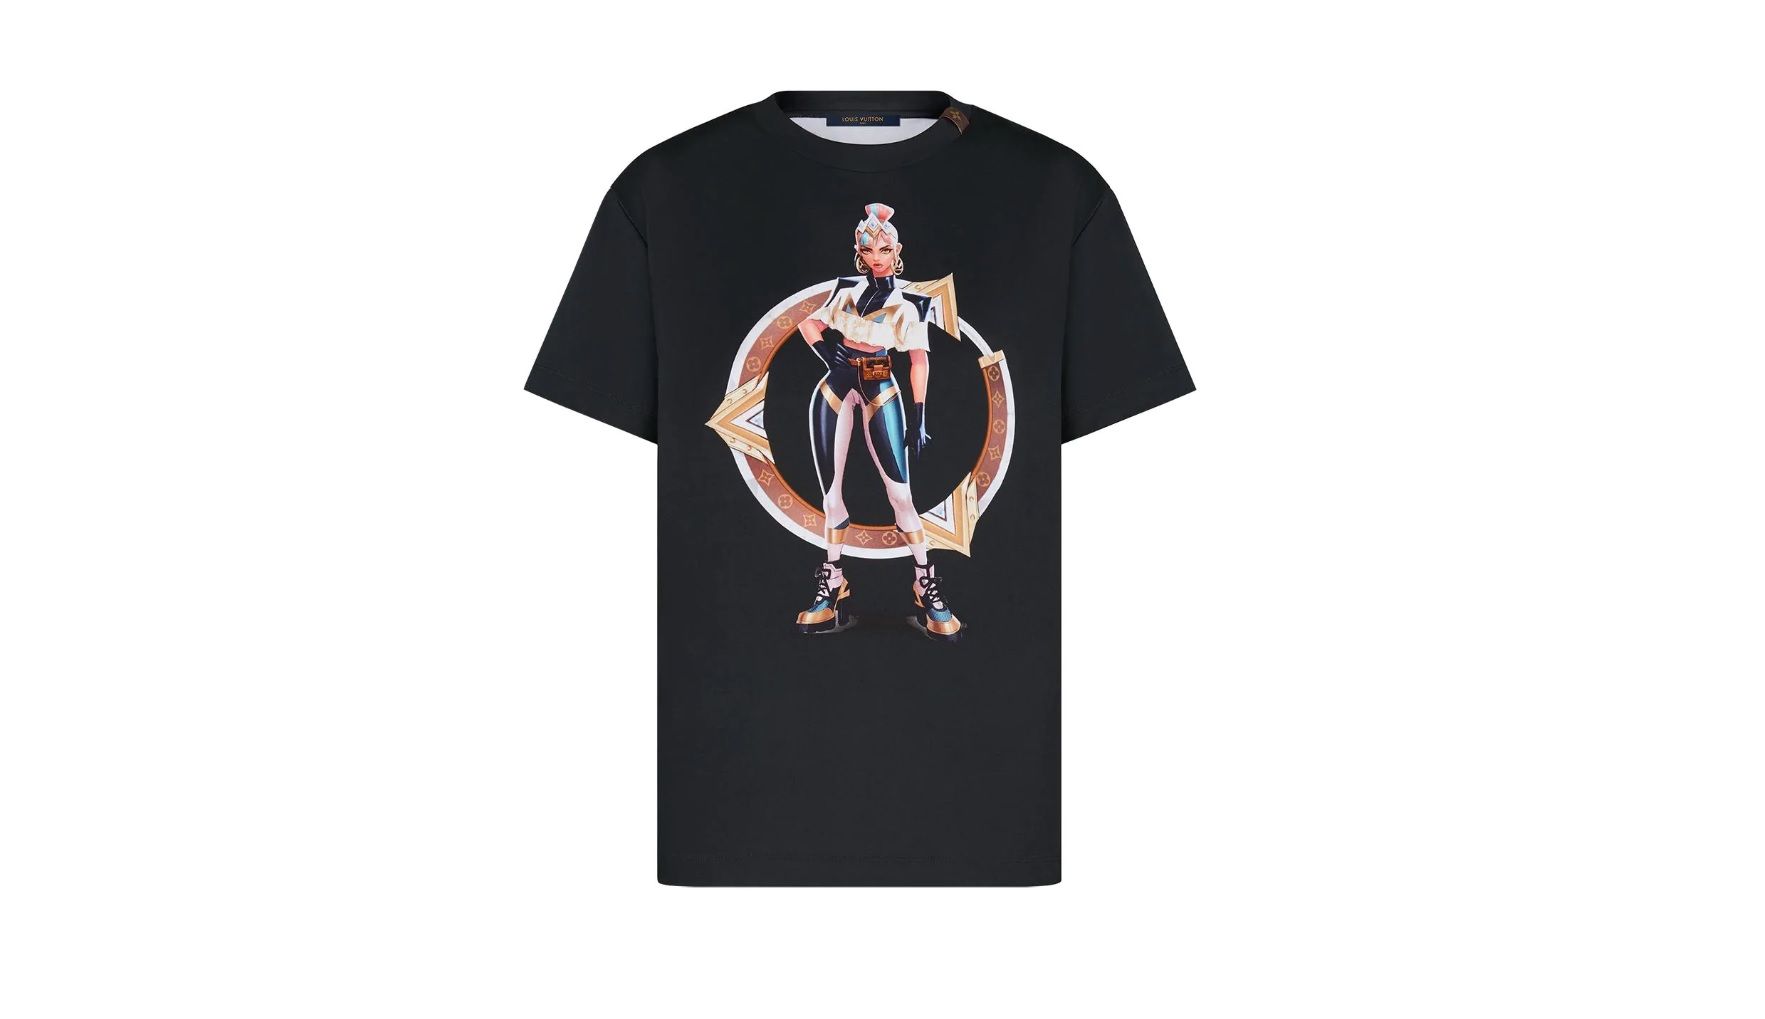 Louis Vuitton is selling League of Legends t-shirts for more than